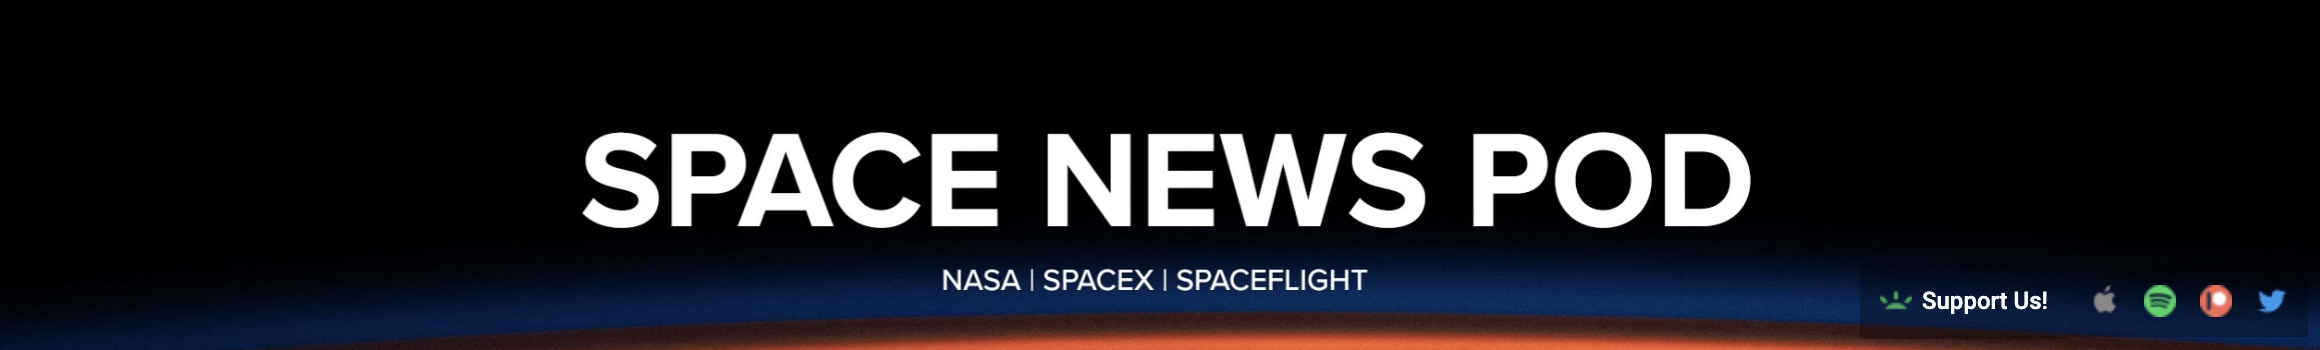 Space News Pod Offers Best Yours App Discount – Get the Deal now!